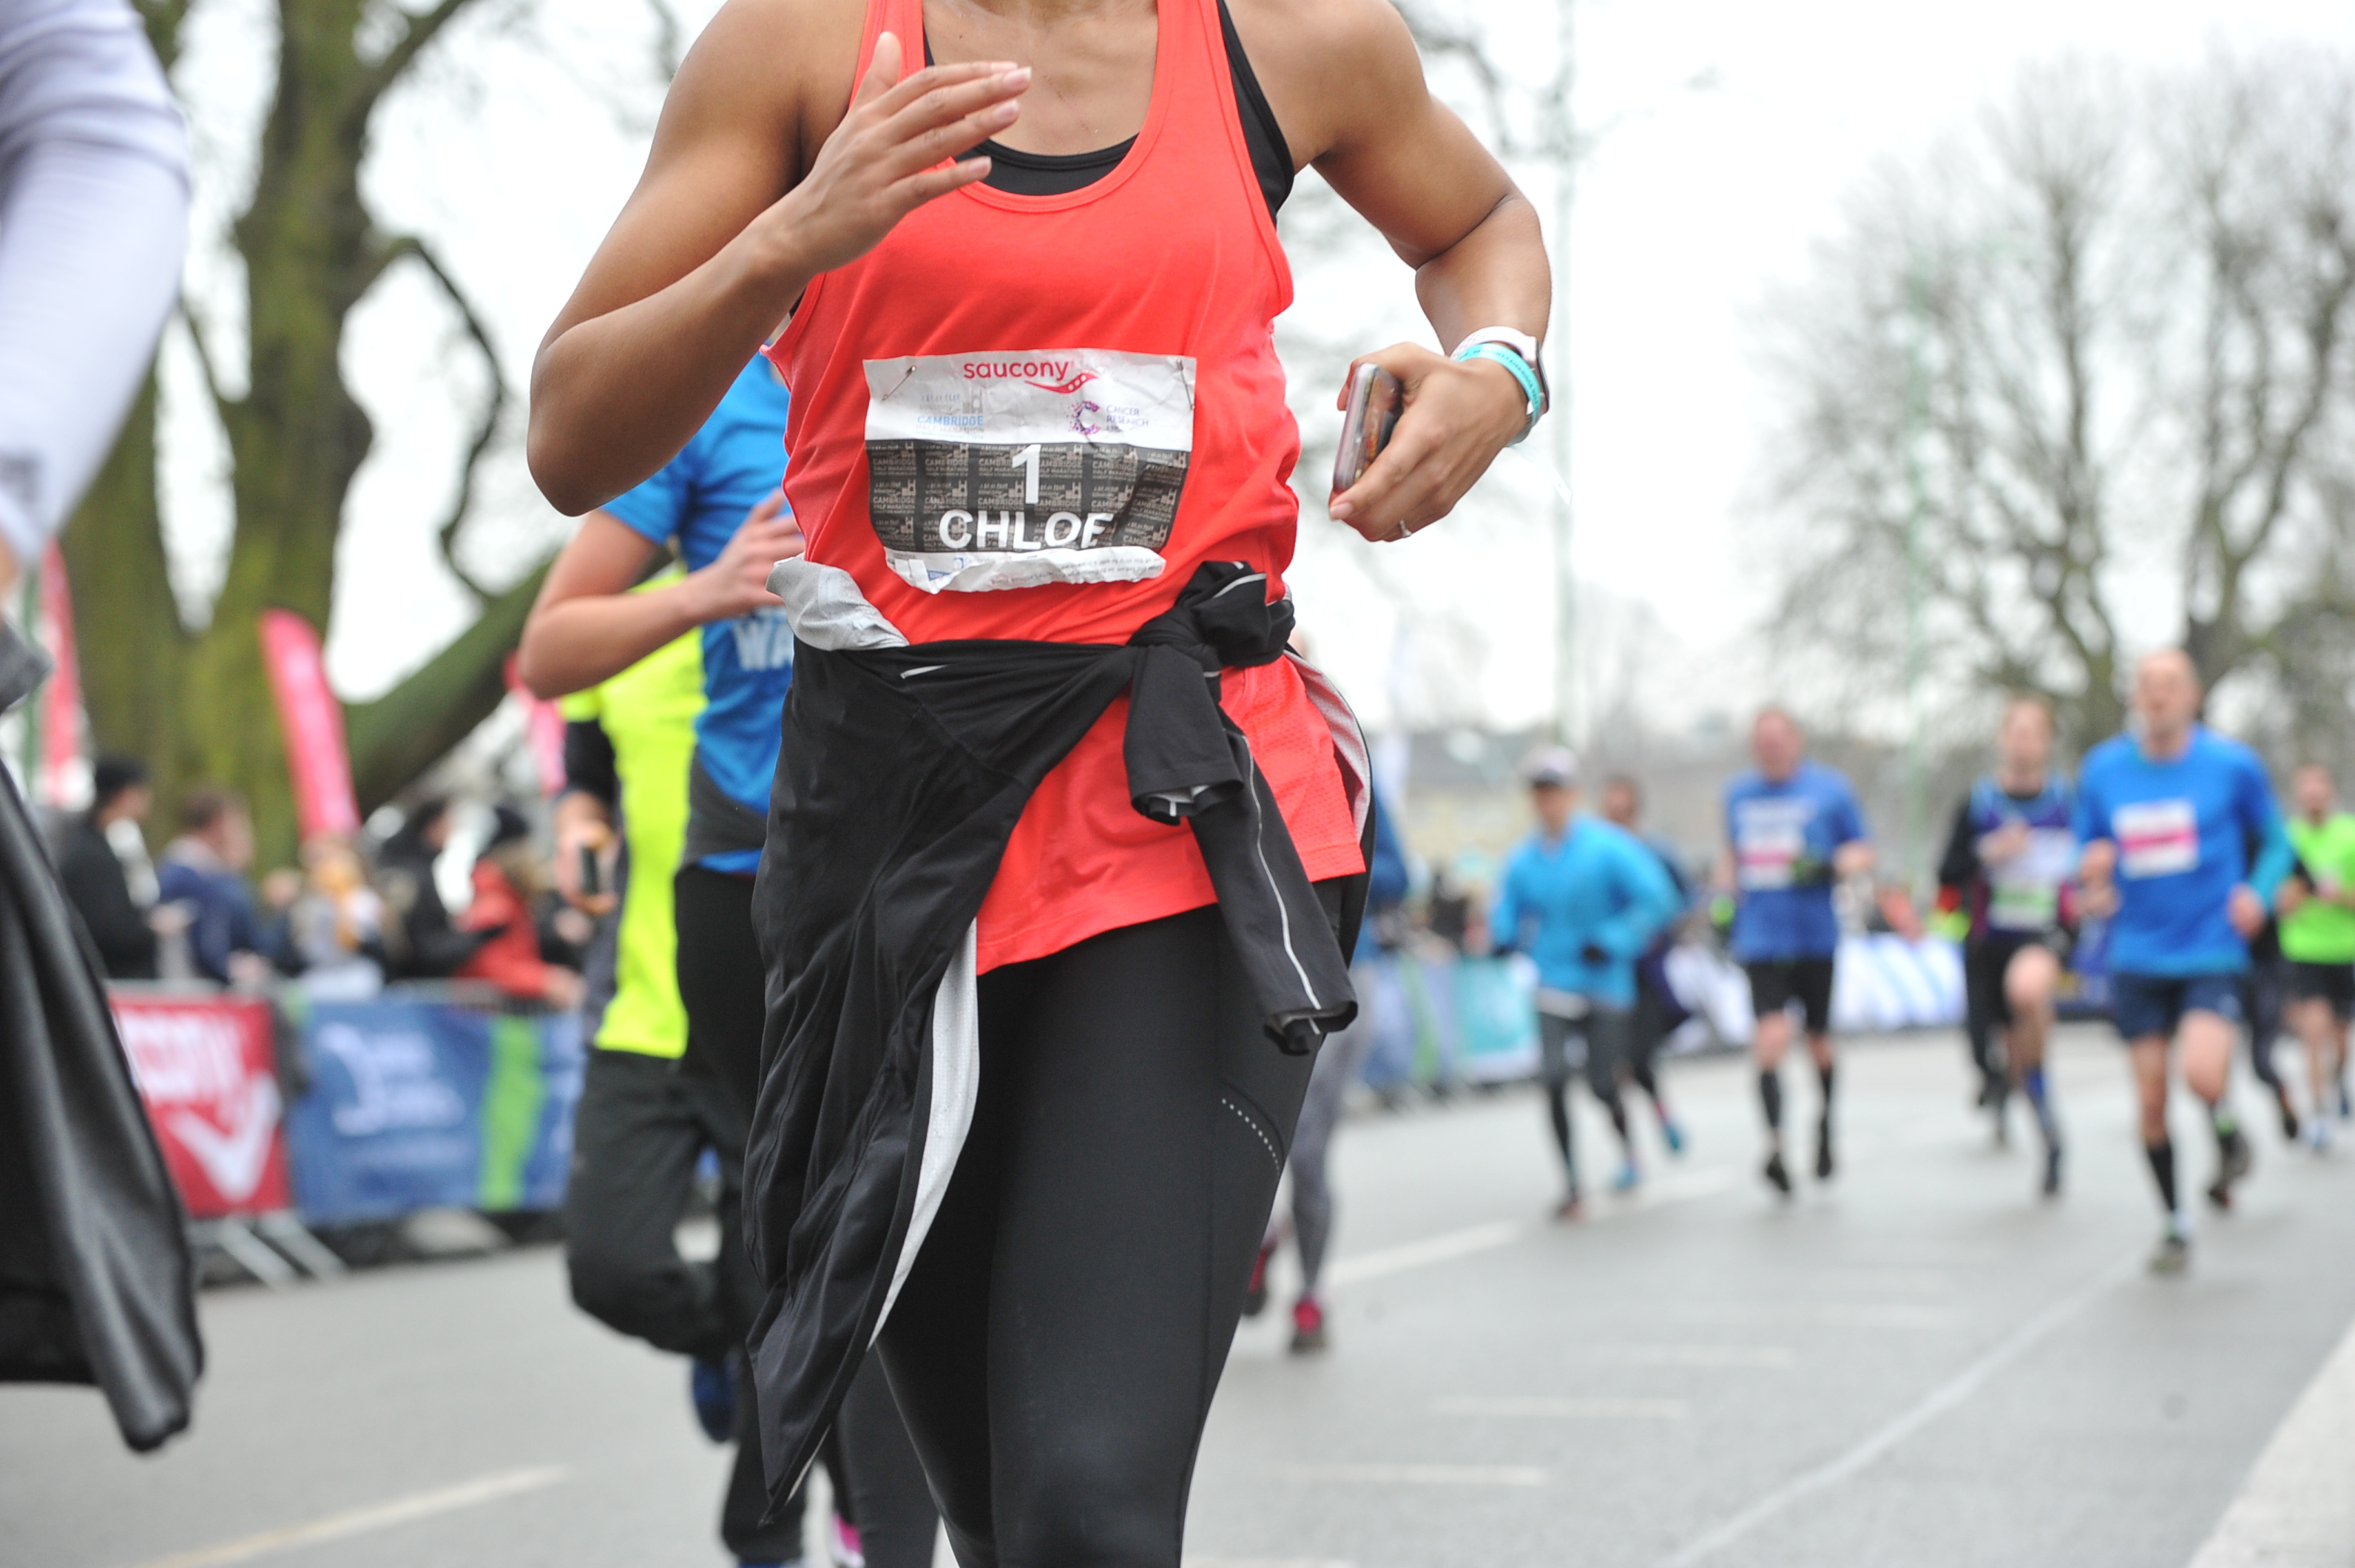 5 Things You Should Know Before Your First Half Marathon